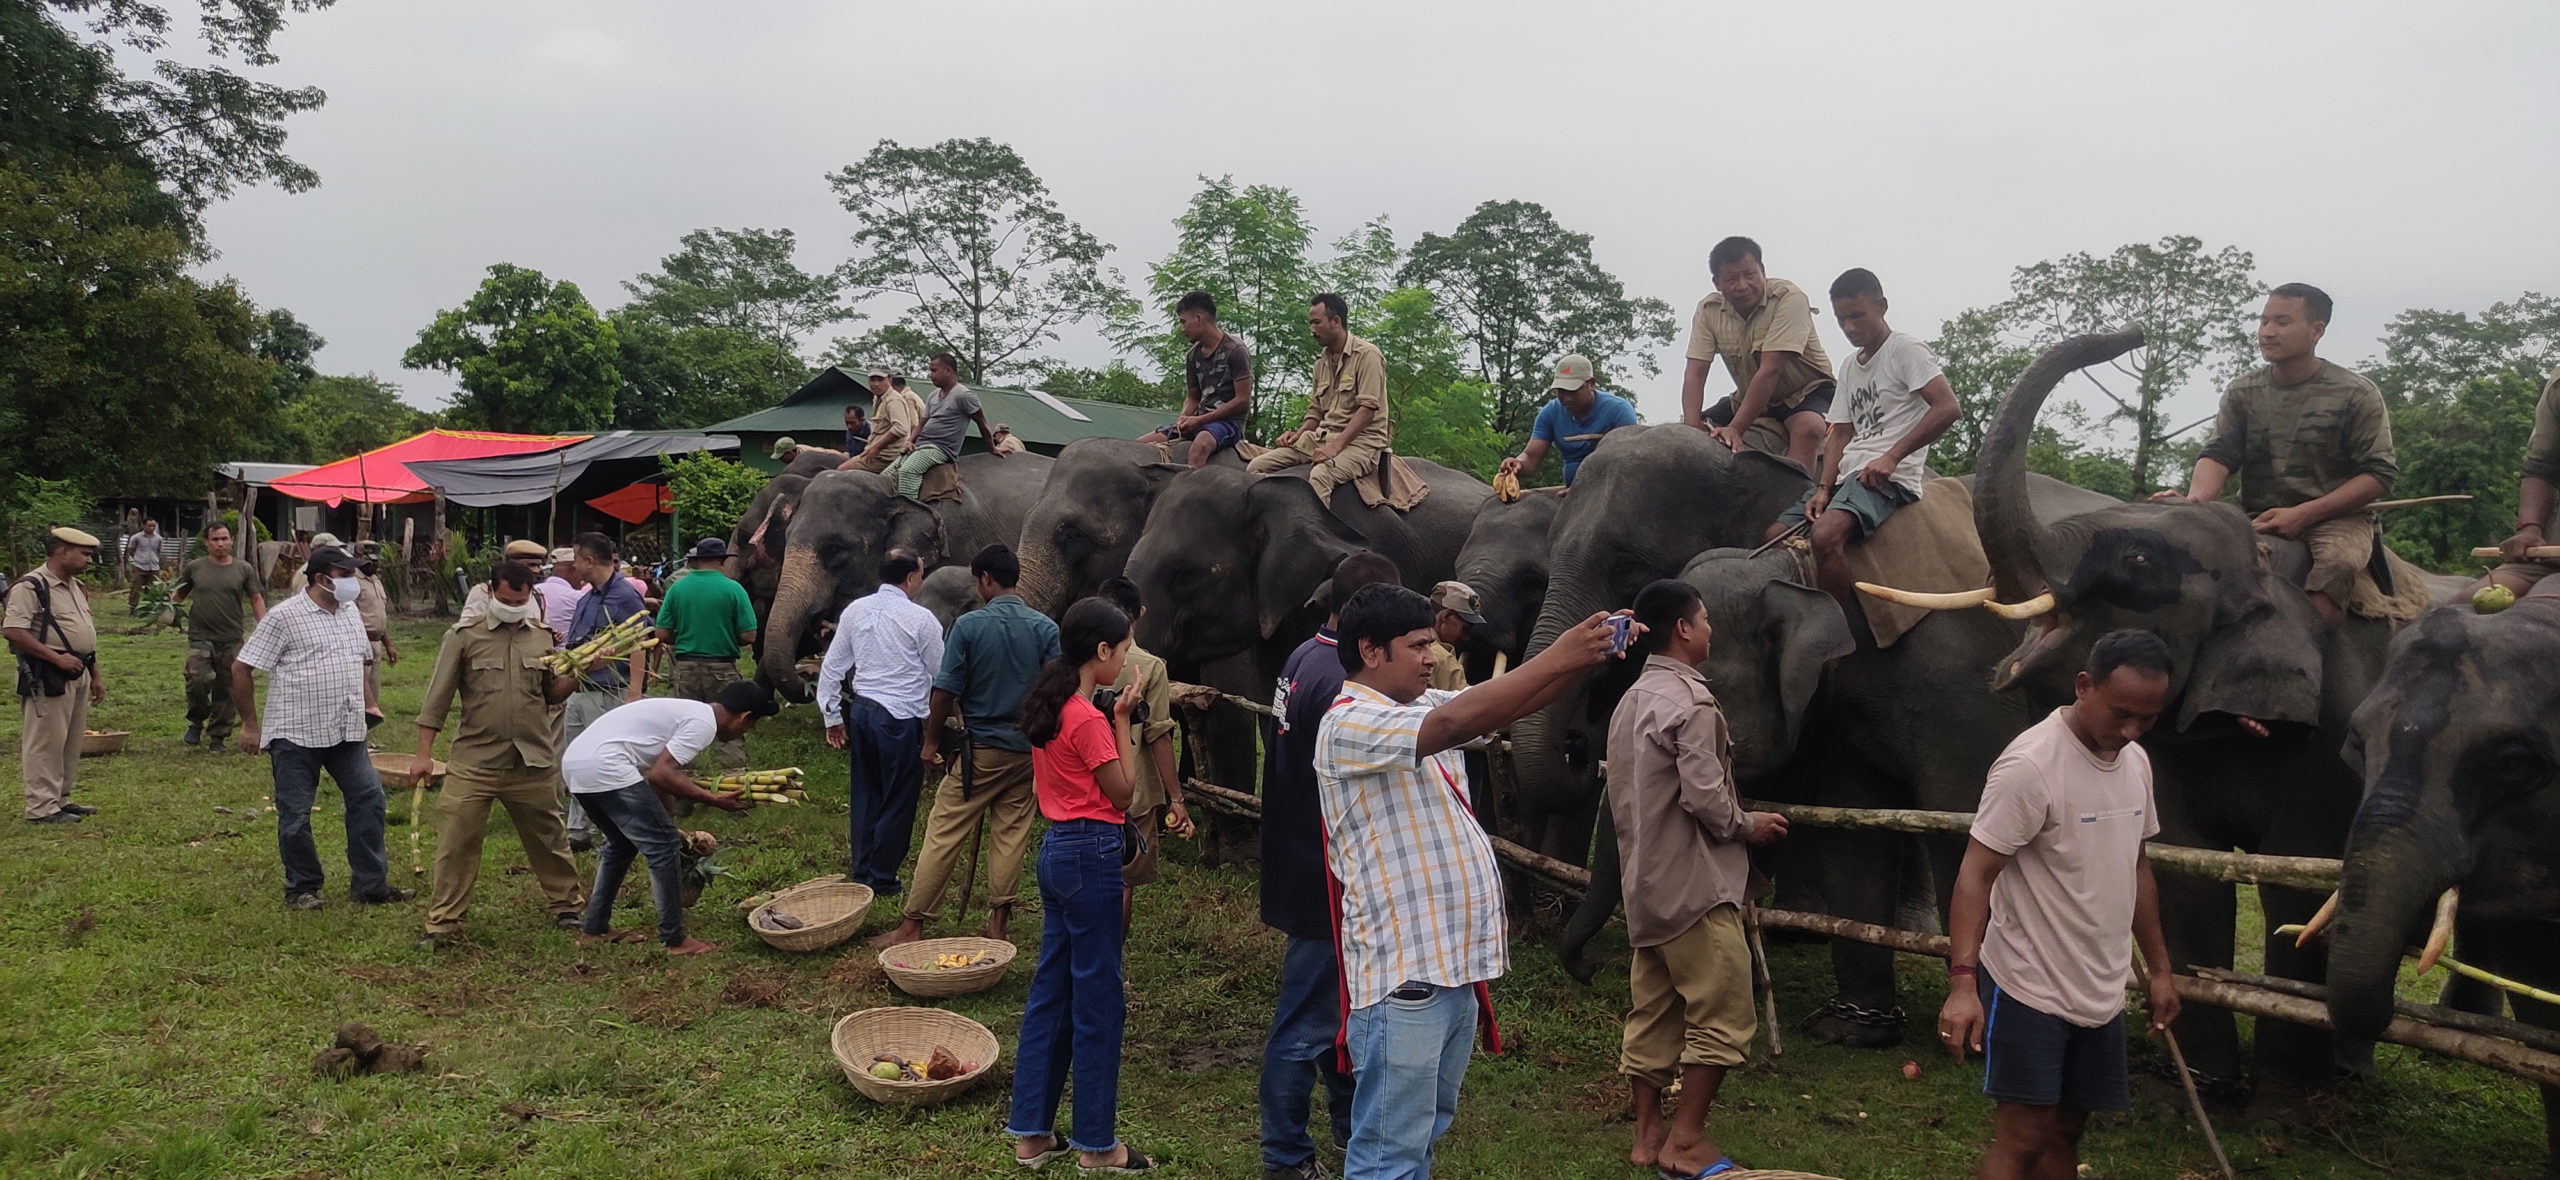 Domesticated elephants of the Assam forest department being fed on World Elephant Day, 12 August (image: Gurvinder Singh)